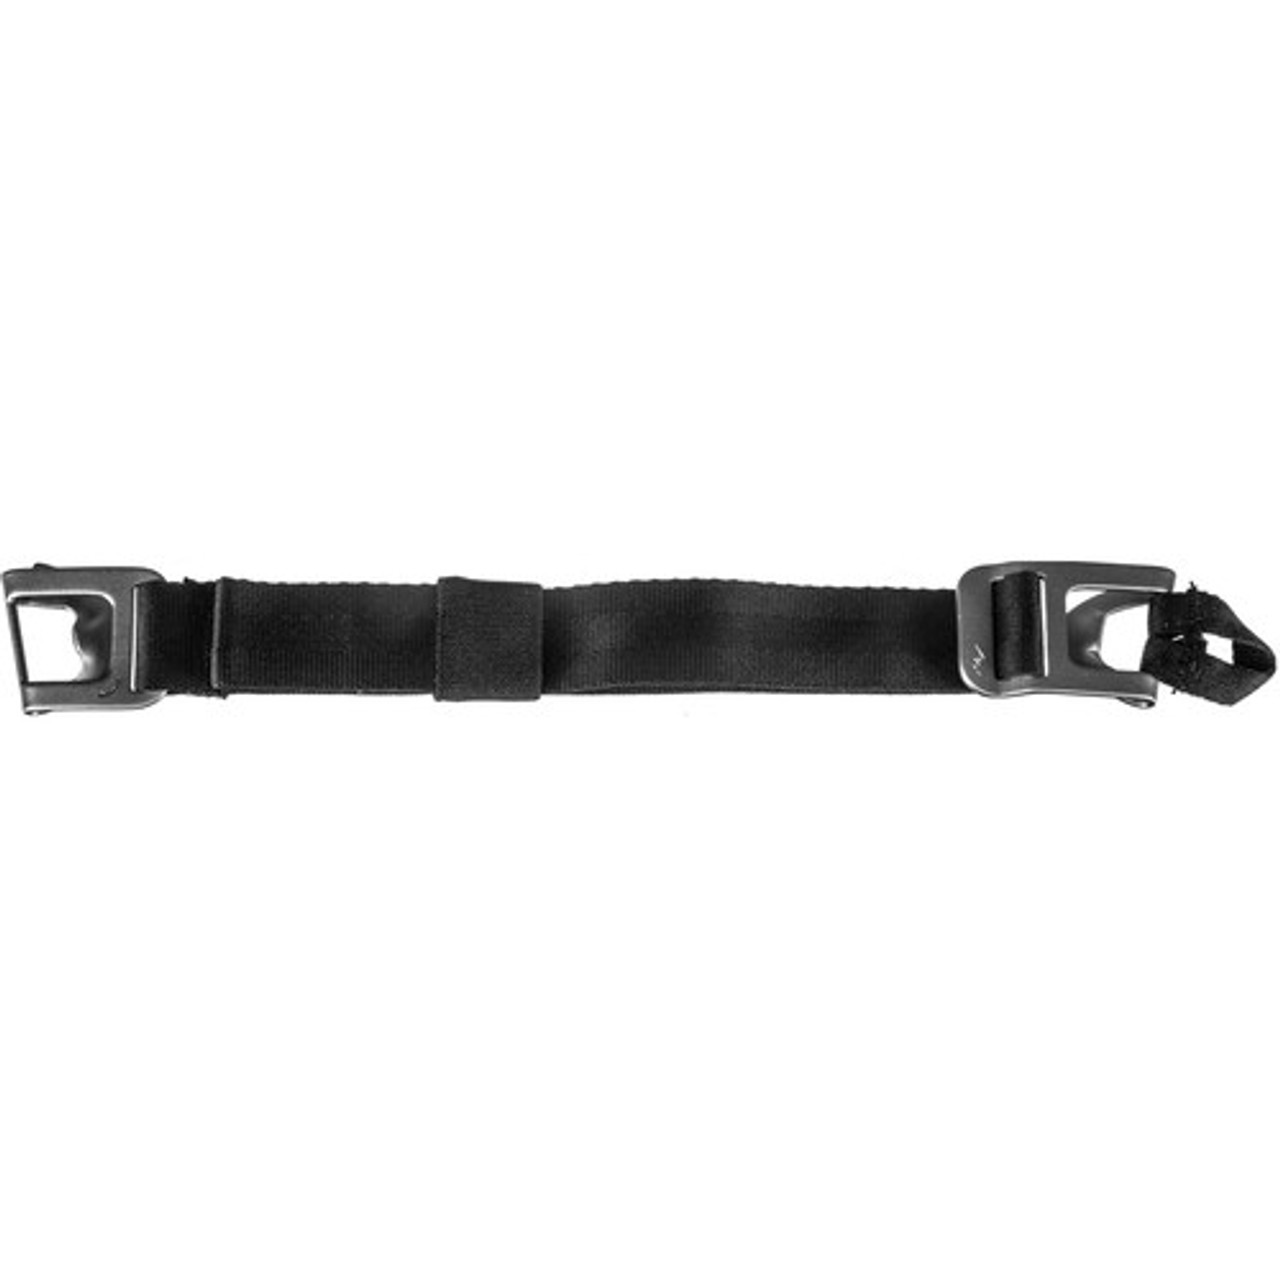 Peak Design Everyday Backpack Replacement Sternum Strap (Charcoal